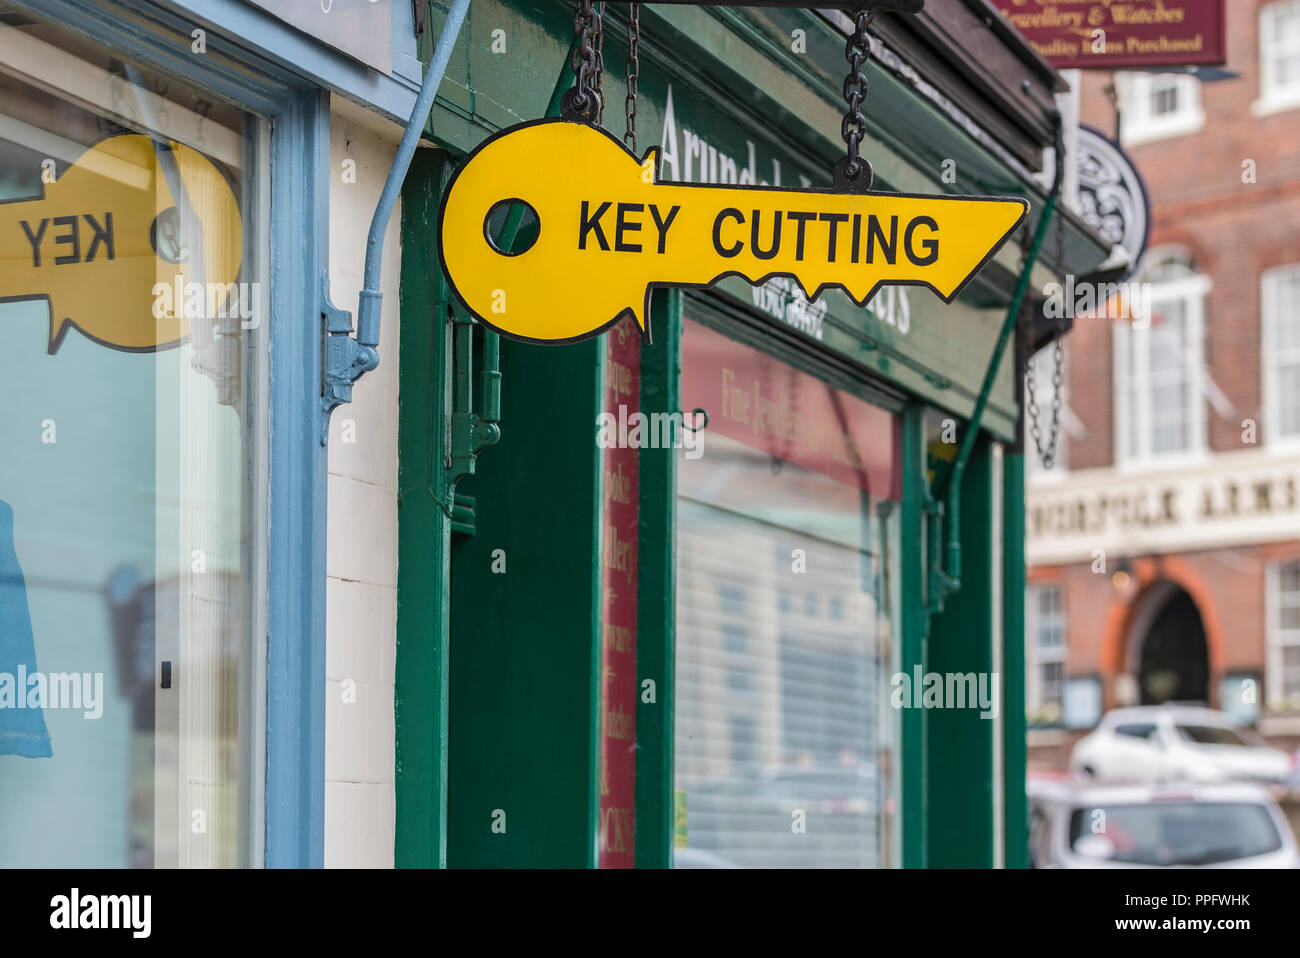 Hanging sign outside a key cutting shop in Arundel, West Sussex, England, UK. Stock Photo